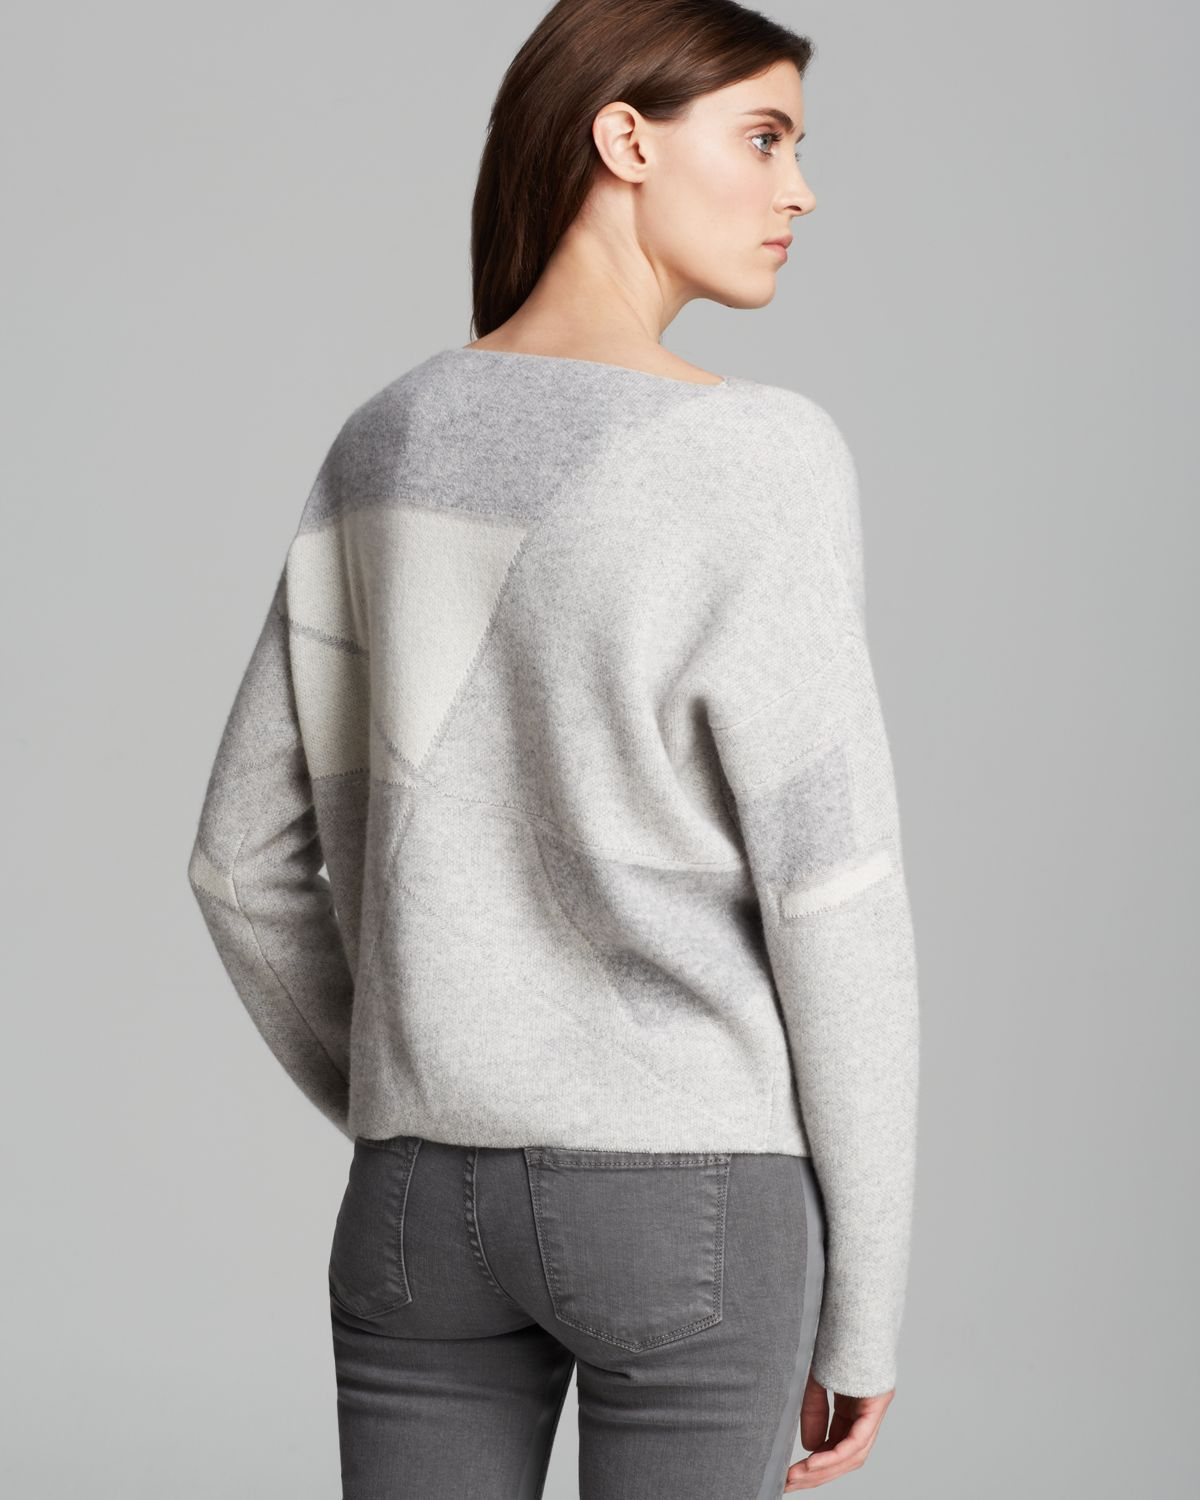 Vince Sweater - Abstract Jacquard in Gray - Lyst